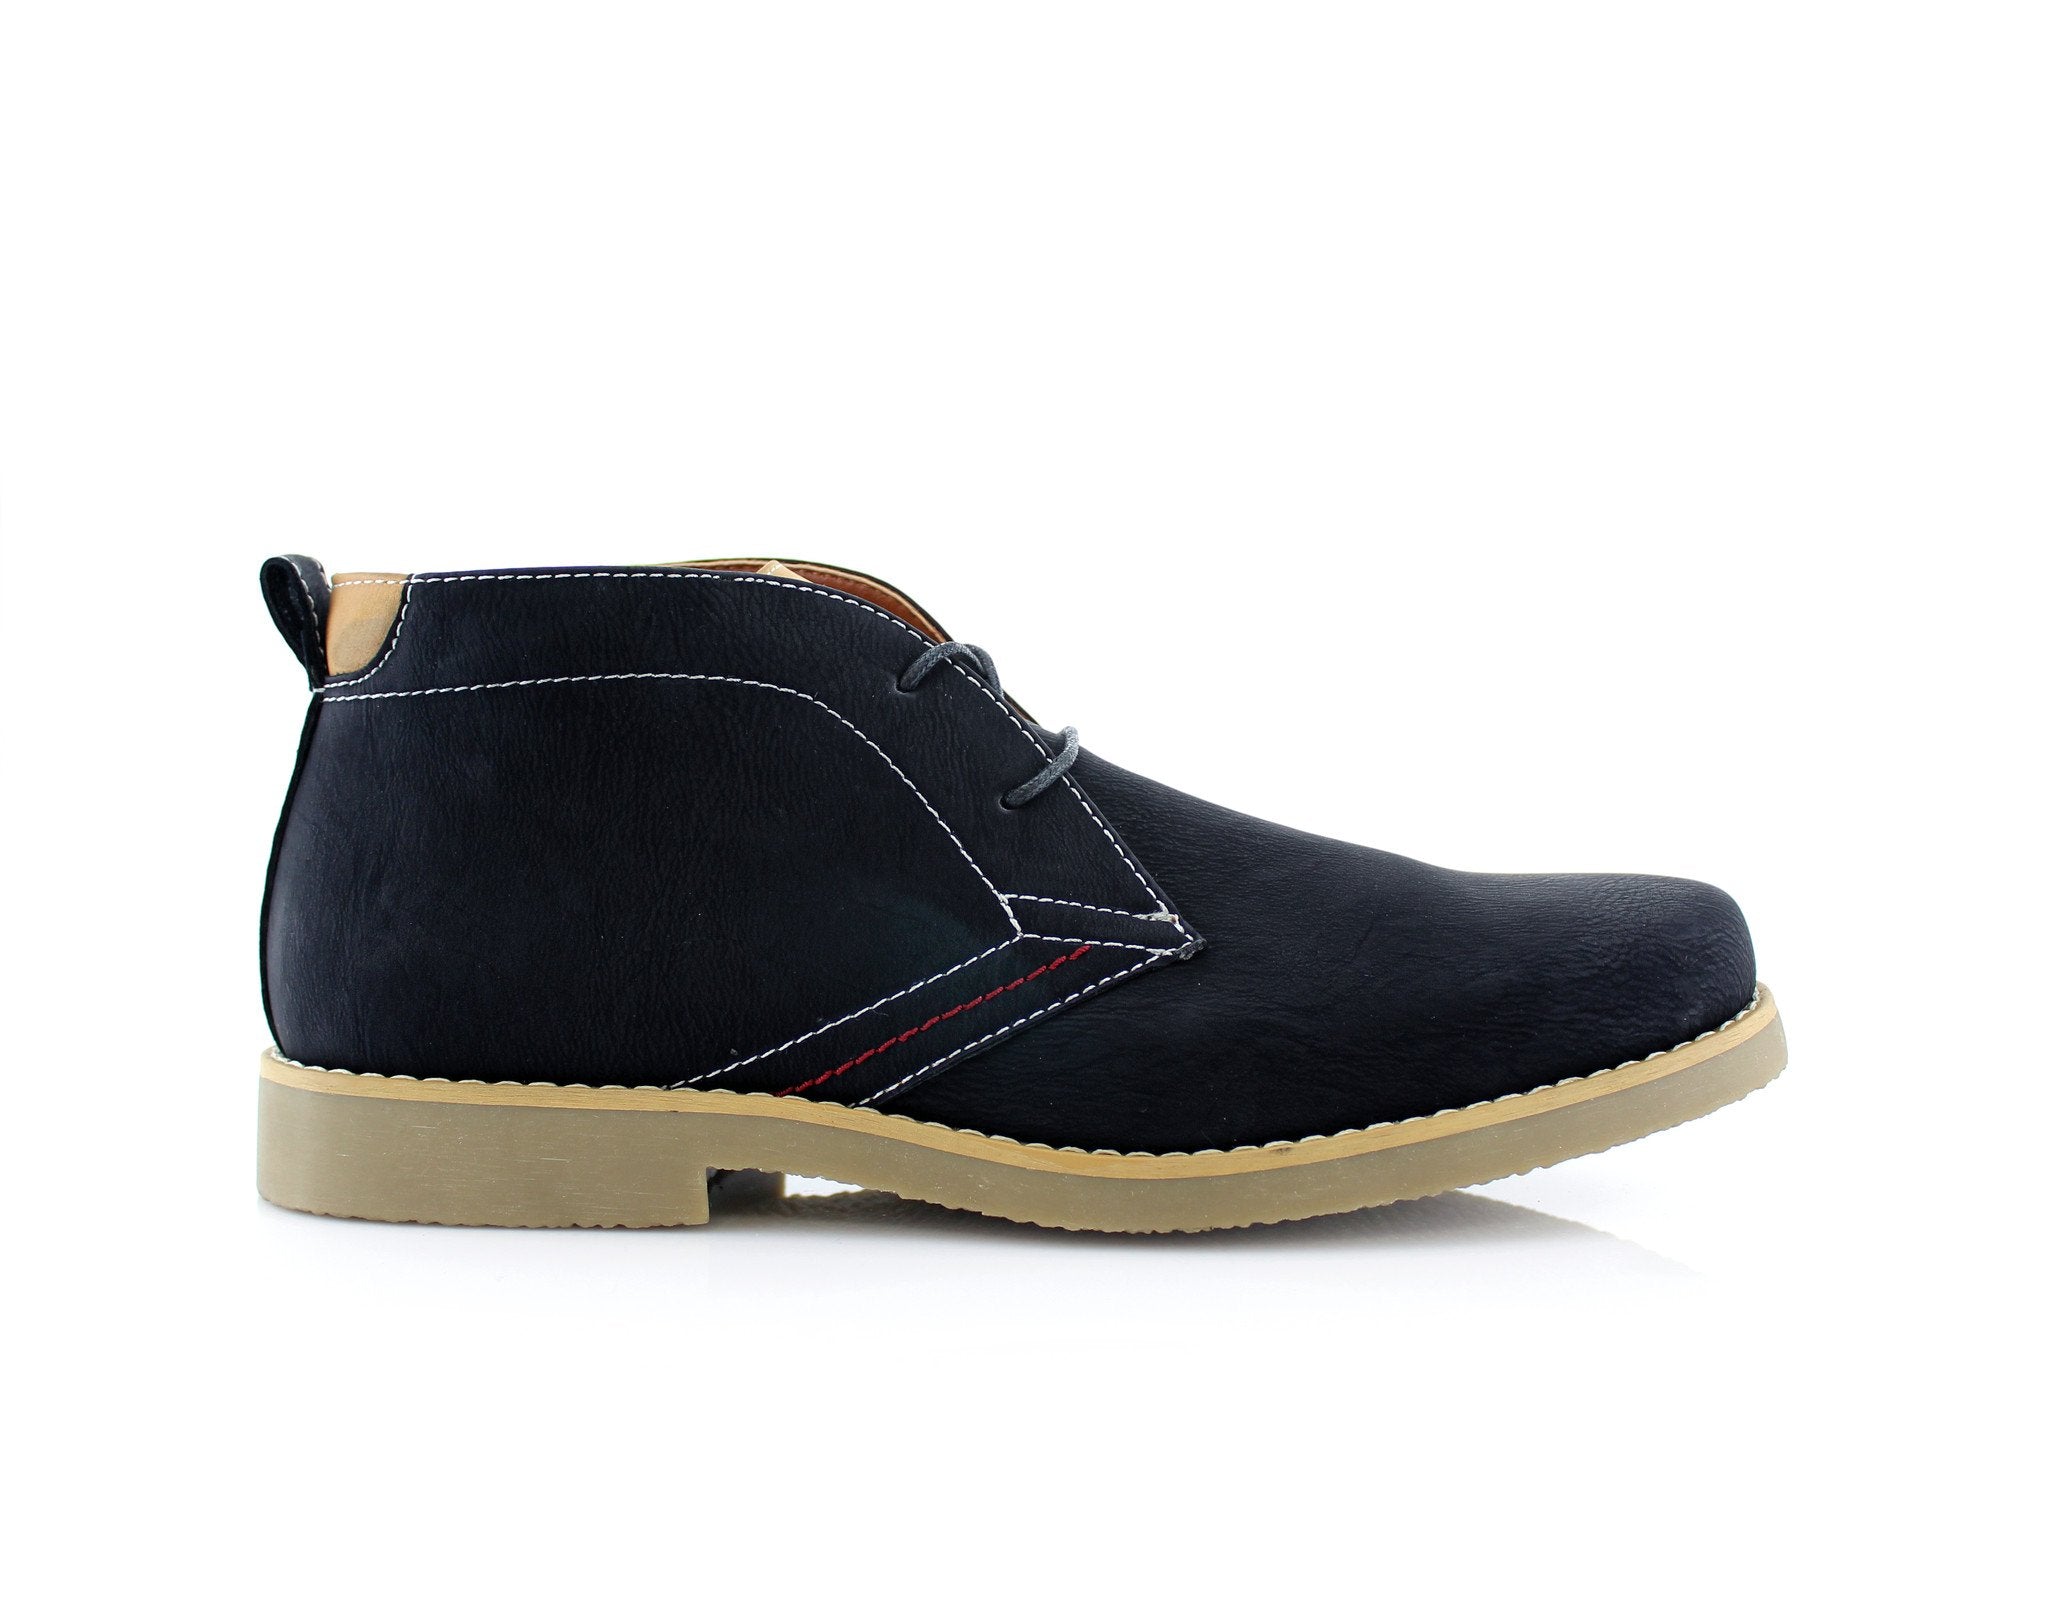 Classic Chukka Boots | Elliot by Polar Fox | Conal Footwear | Outer Side Angle View